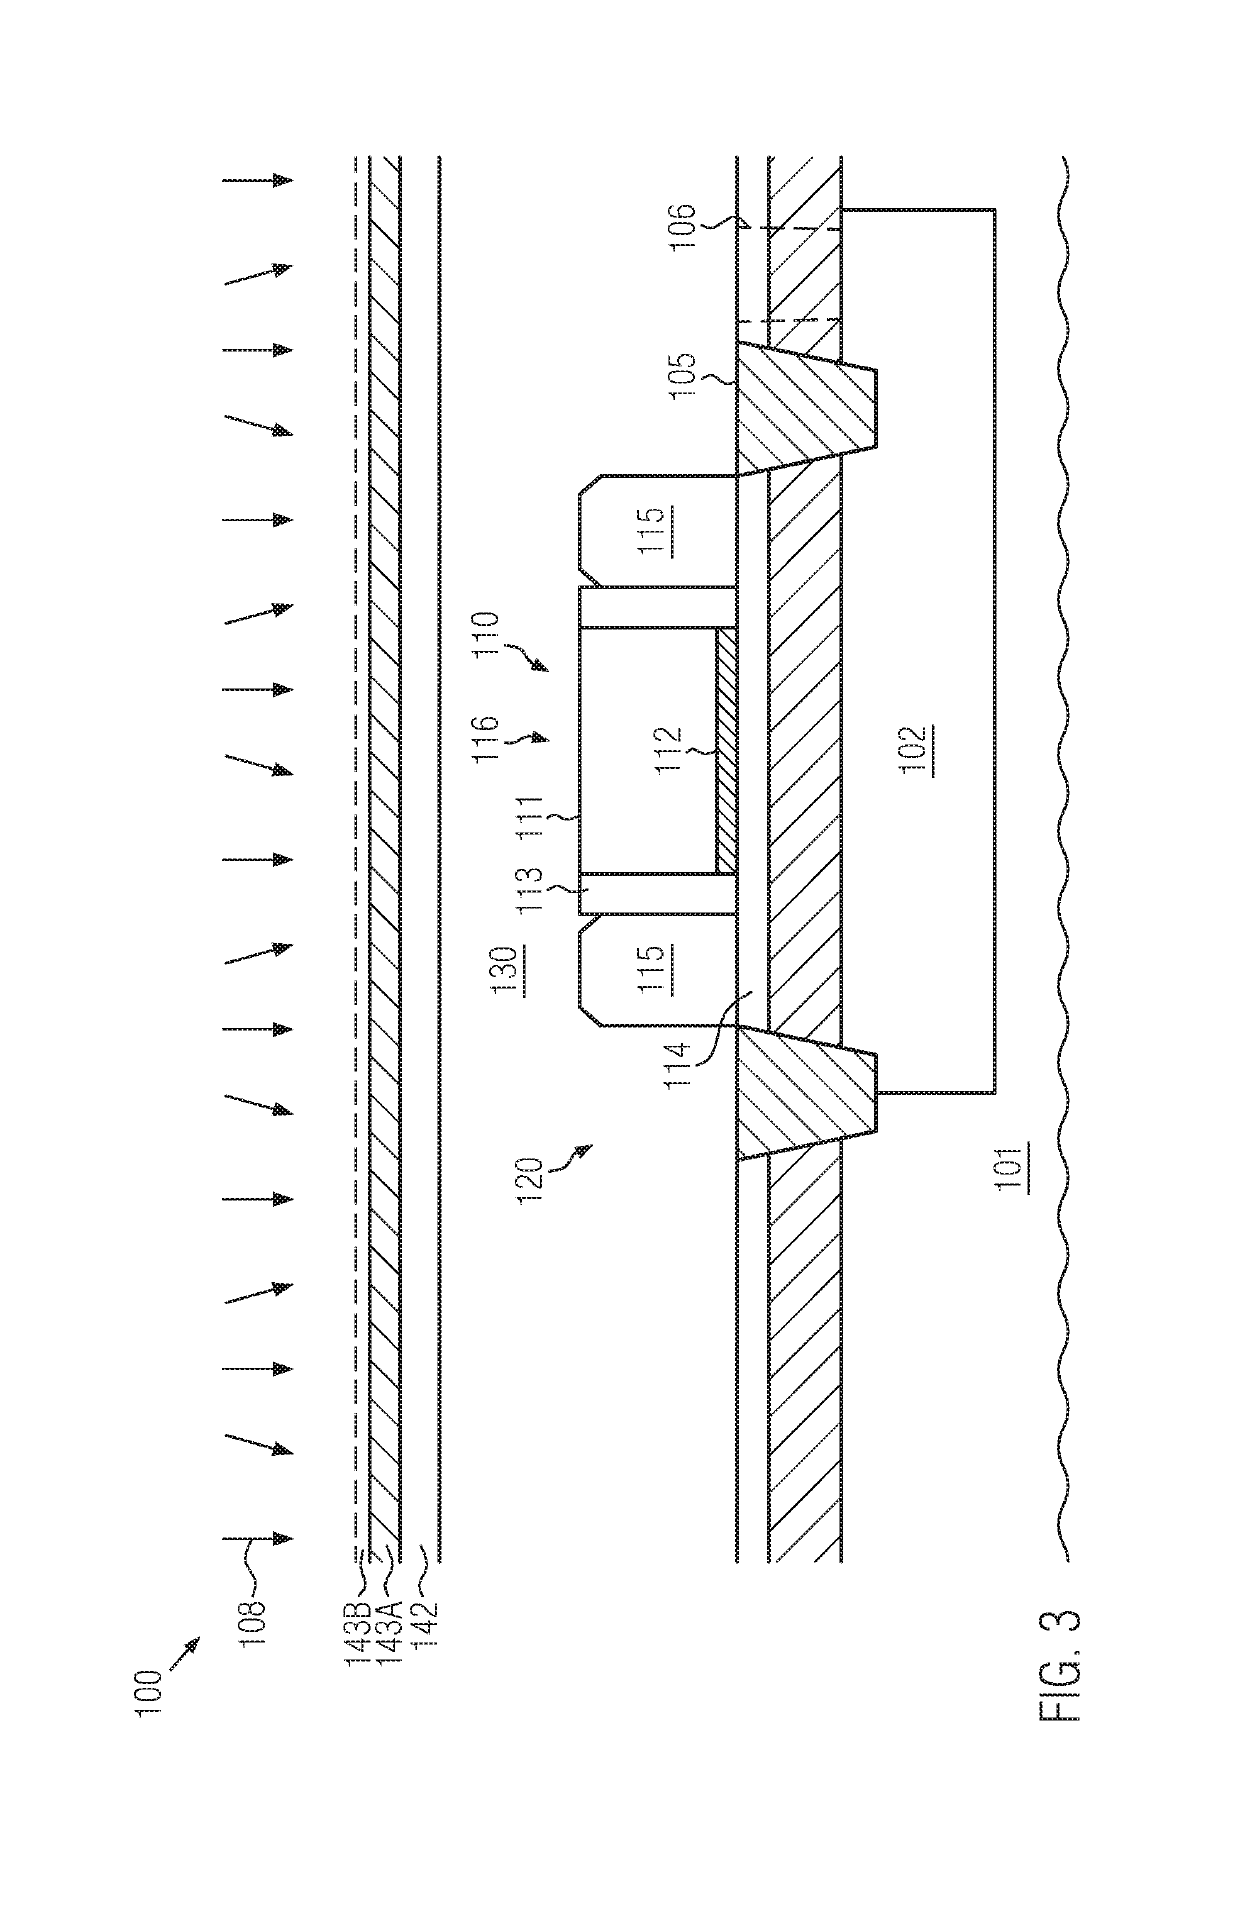 Stacked SOI semiconductor devices with back bias mechanism